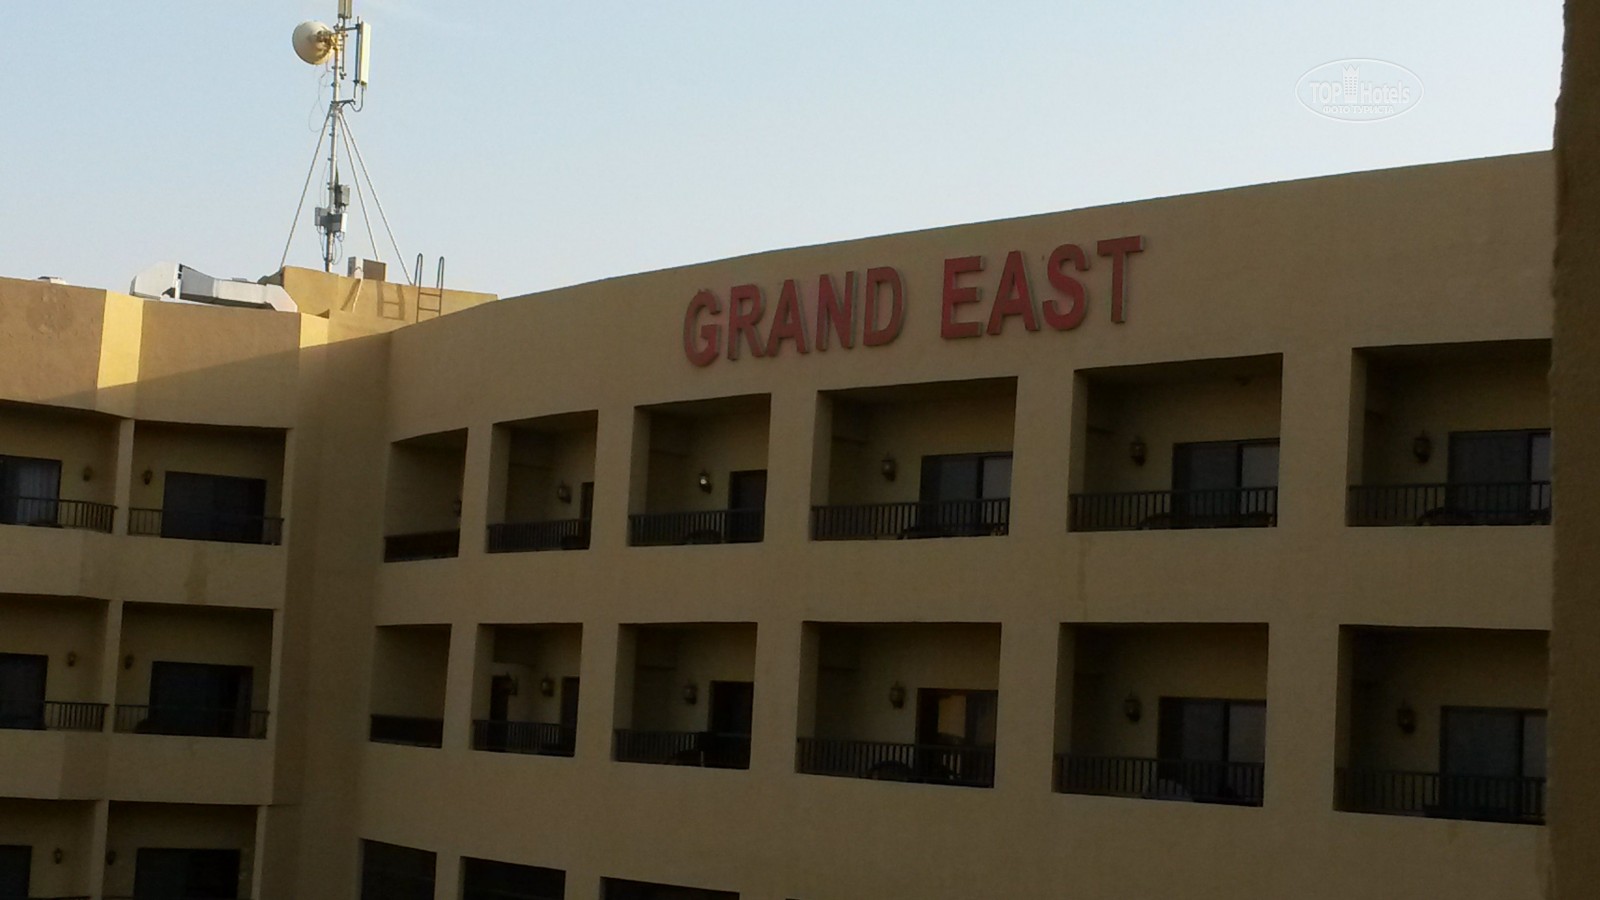 Tours to the hotel Grand East Hotel